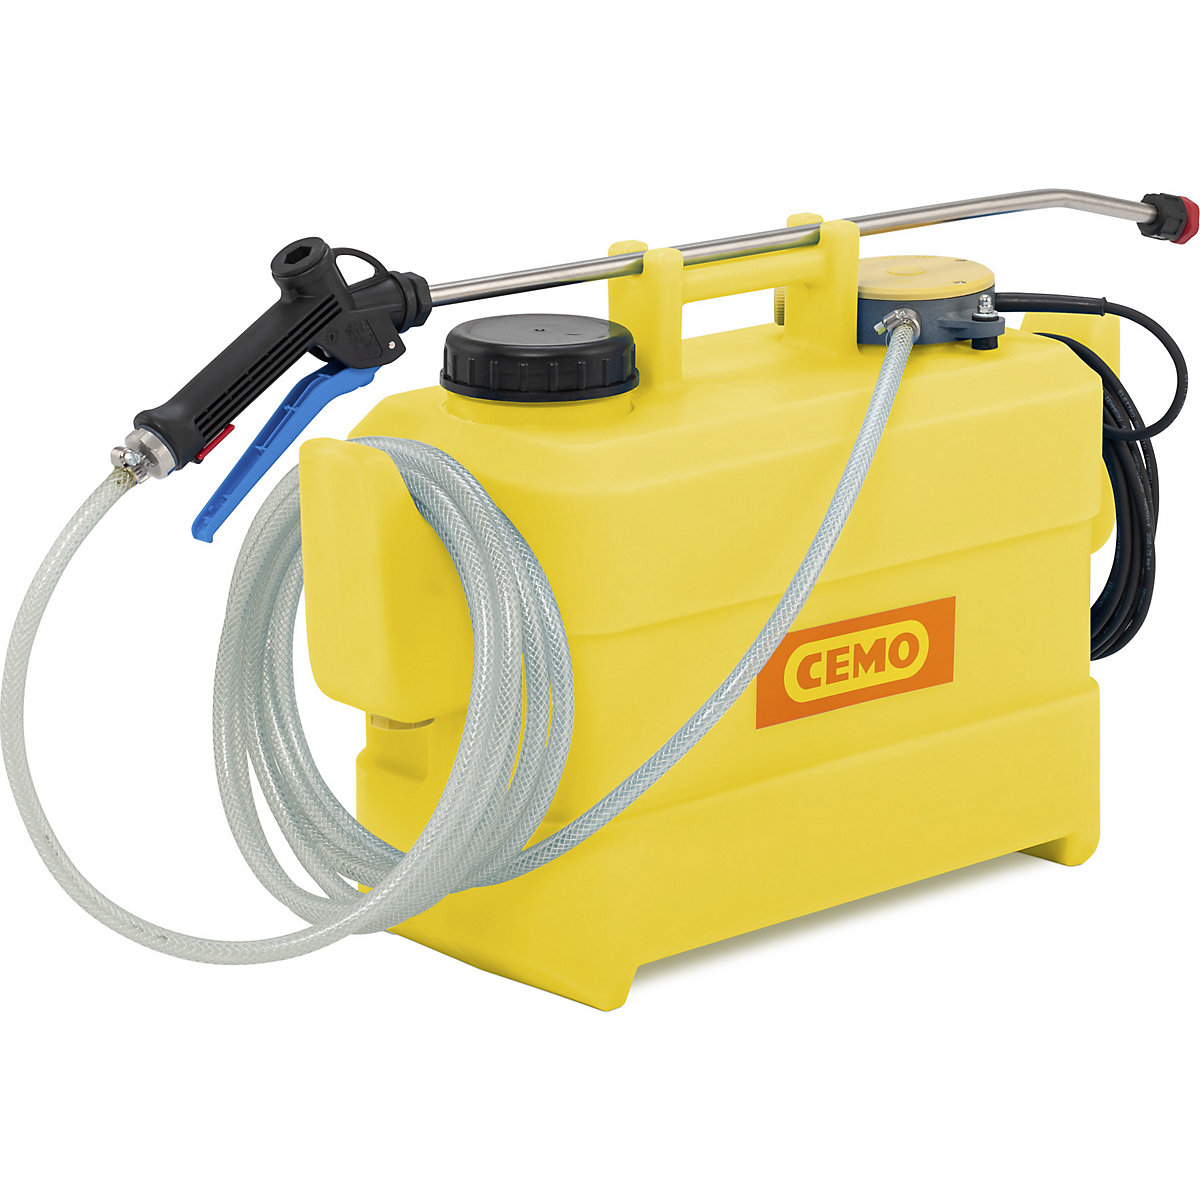 CEMO – Electric sprayer with container for disinfectant solutions